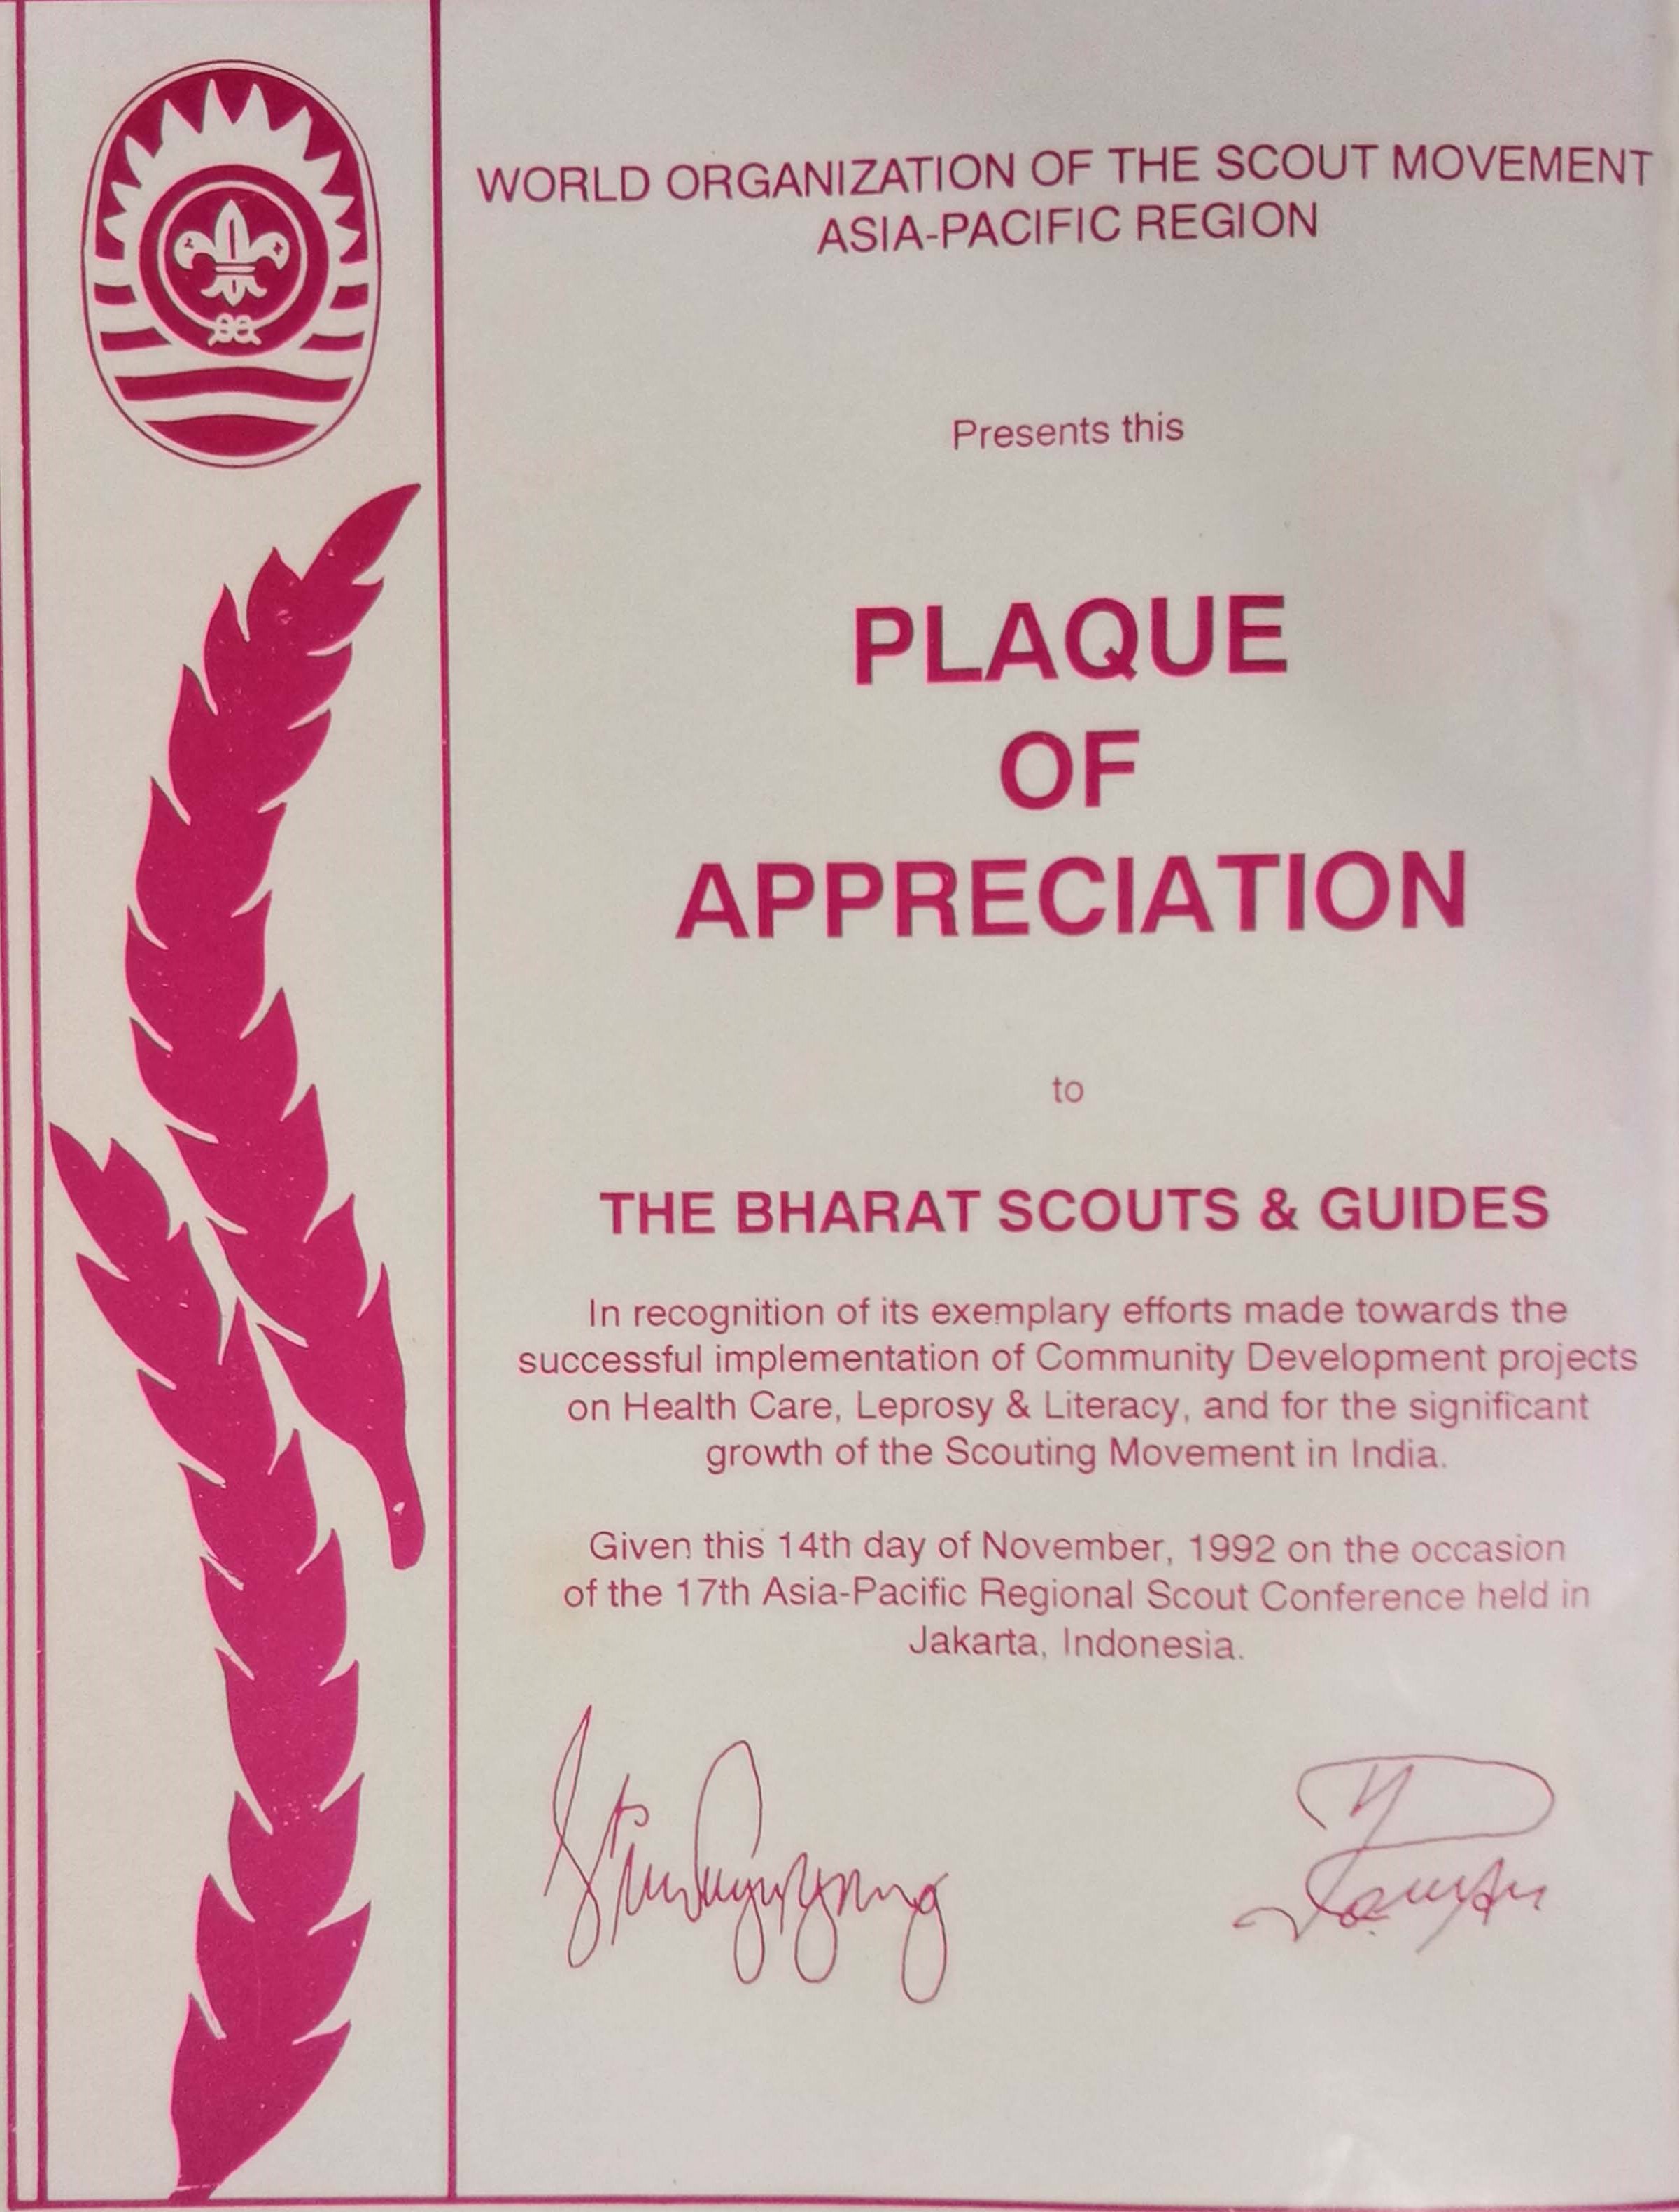 Plaque presented by Asia Pacific Region as recognition to Bharat Scouts and Guides for service Activities.